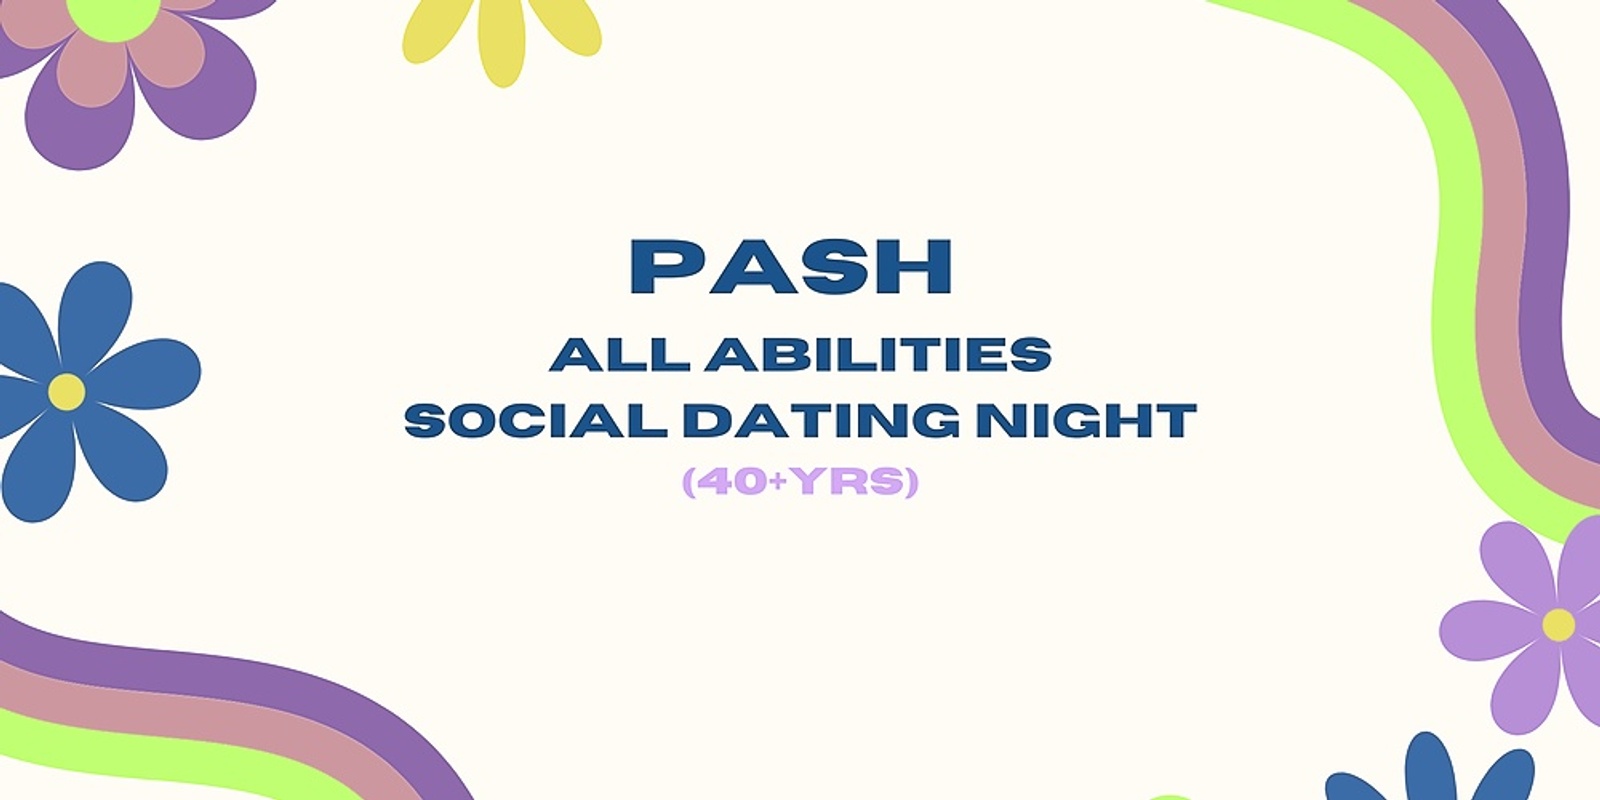 Banner image for PASH All Abilities Social Dating Night (40+yrs)